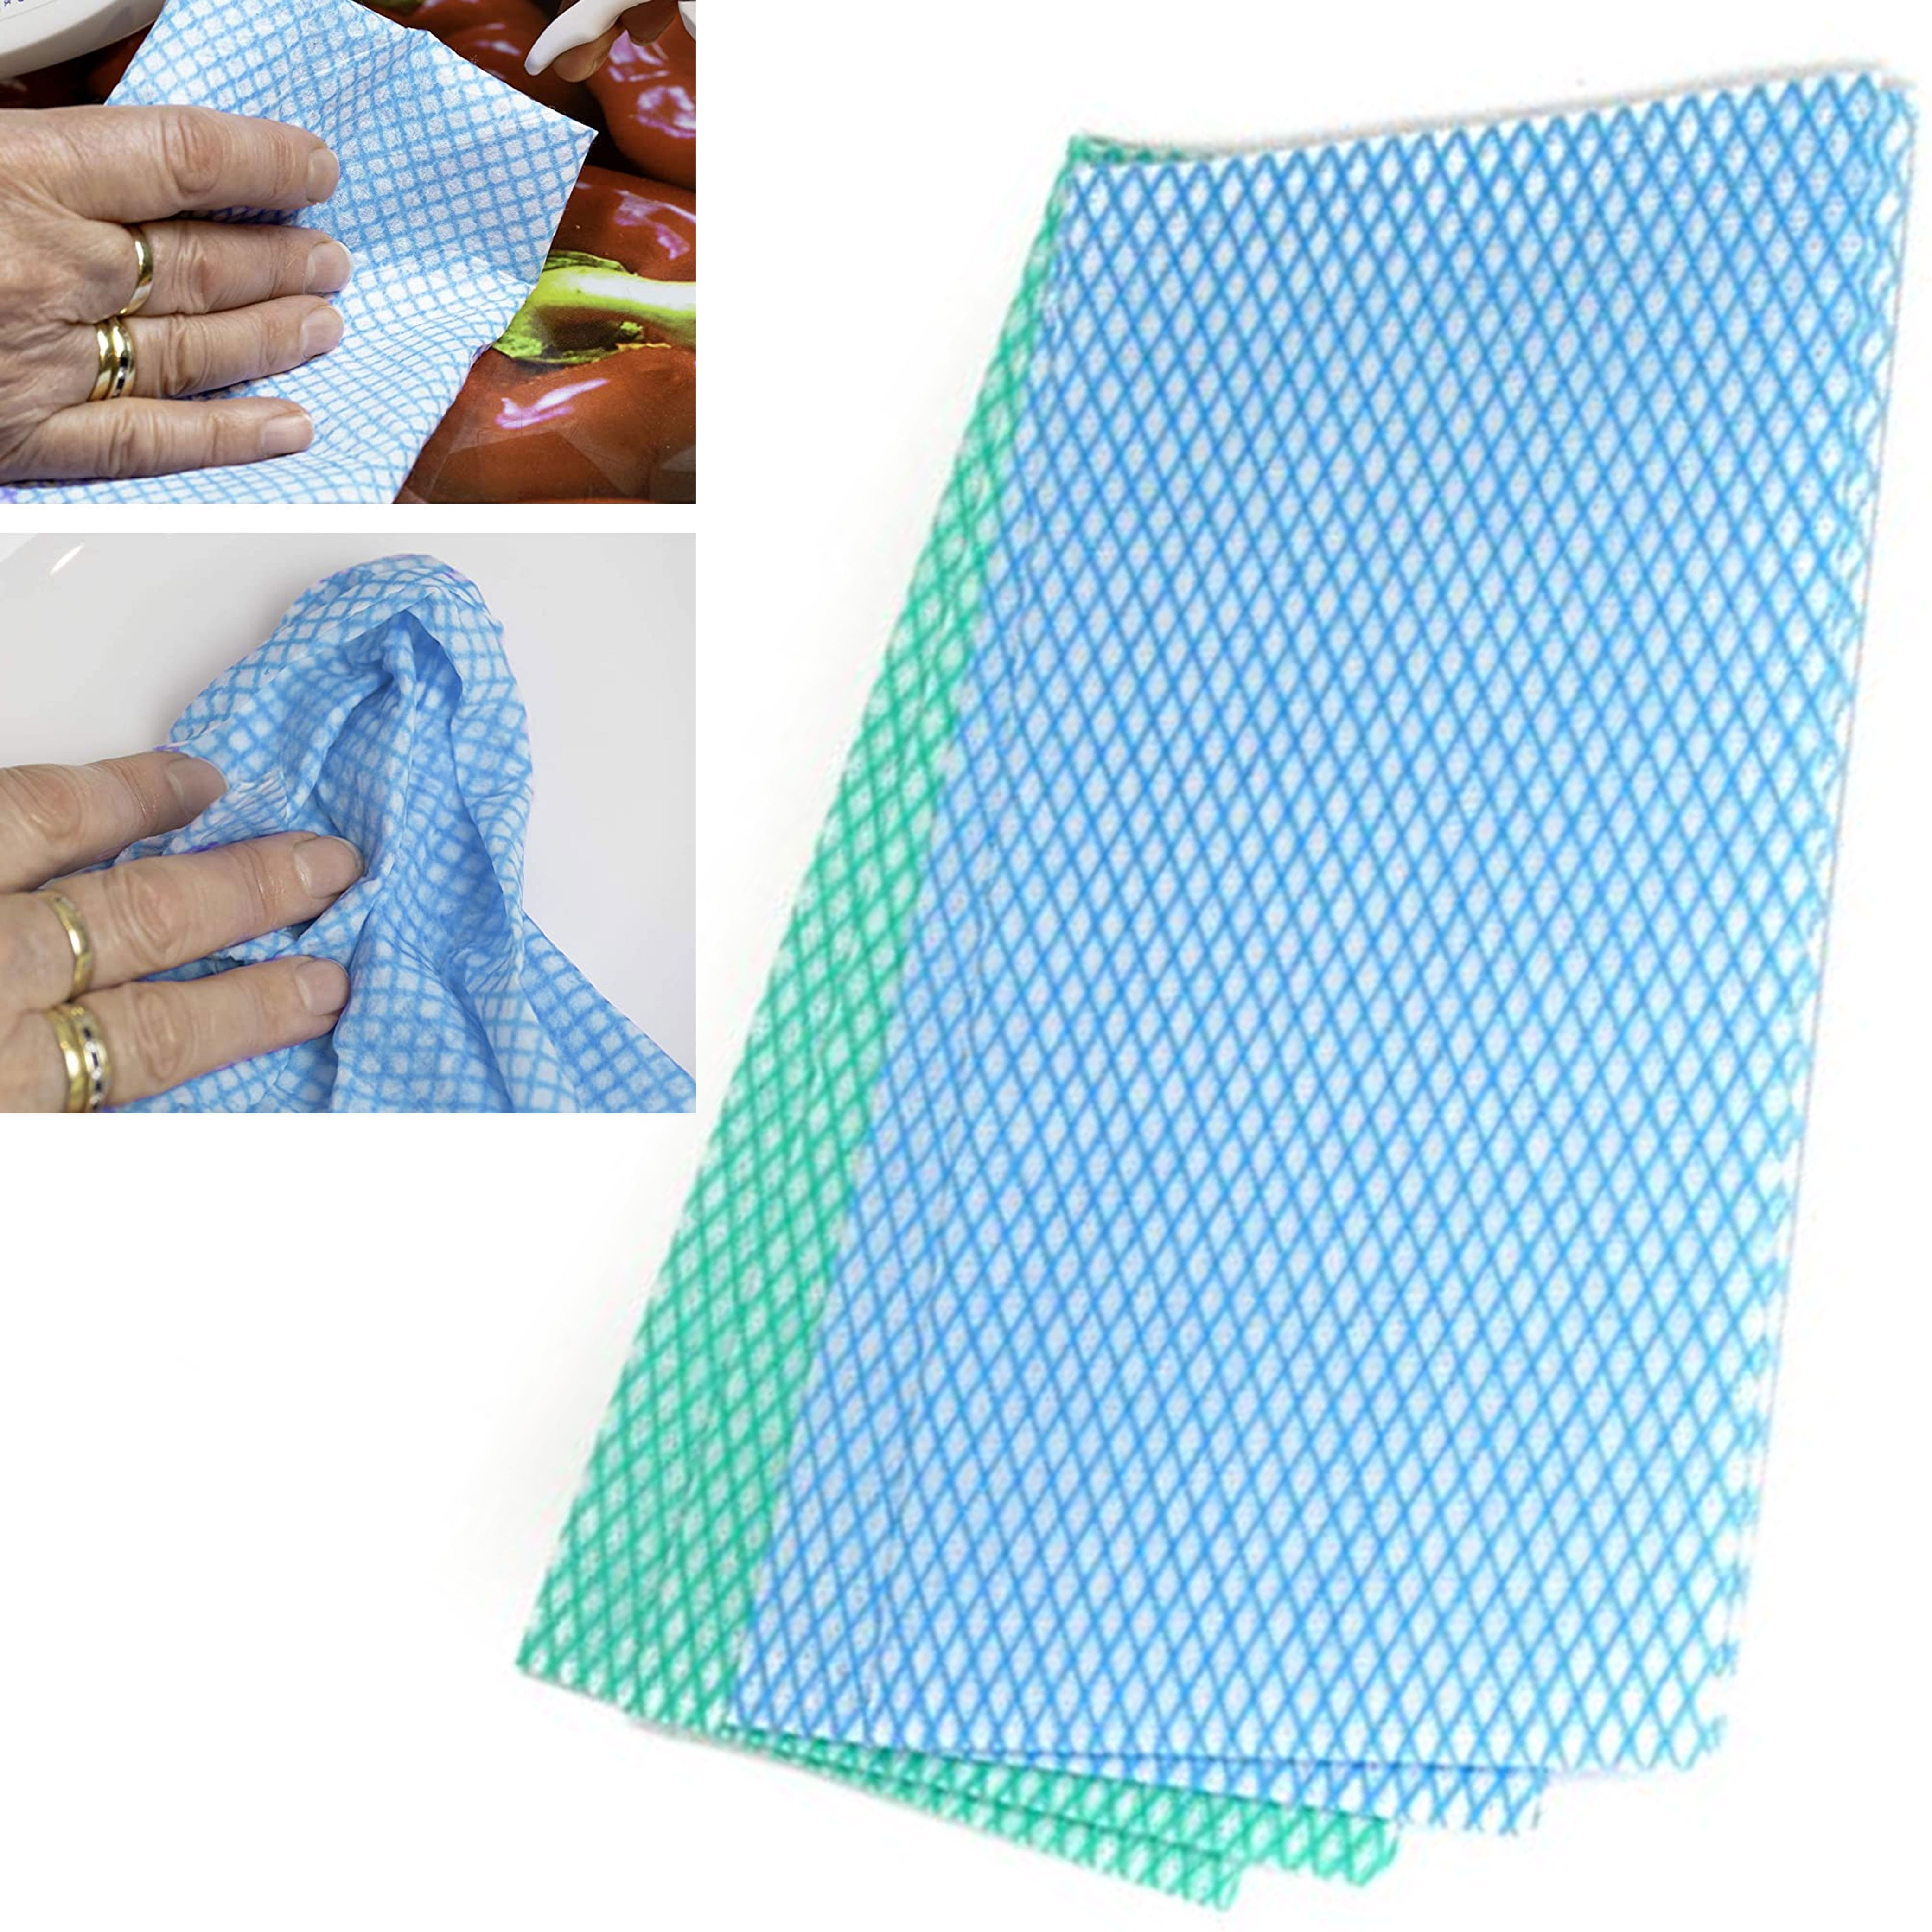 Disposable Dish Cloth, J Cloth, Reusable Cleaning Cloth Disposable Heavy Duty Dish Towels Dish Cloth Reusable Kitchen J Clothes 60 Count 11.9